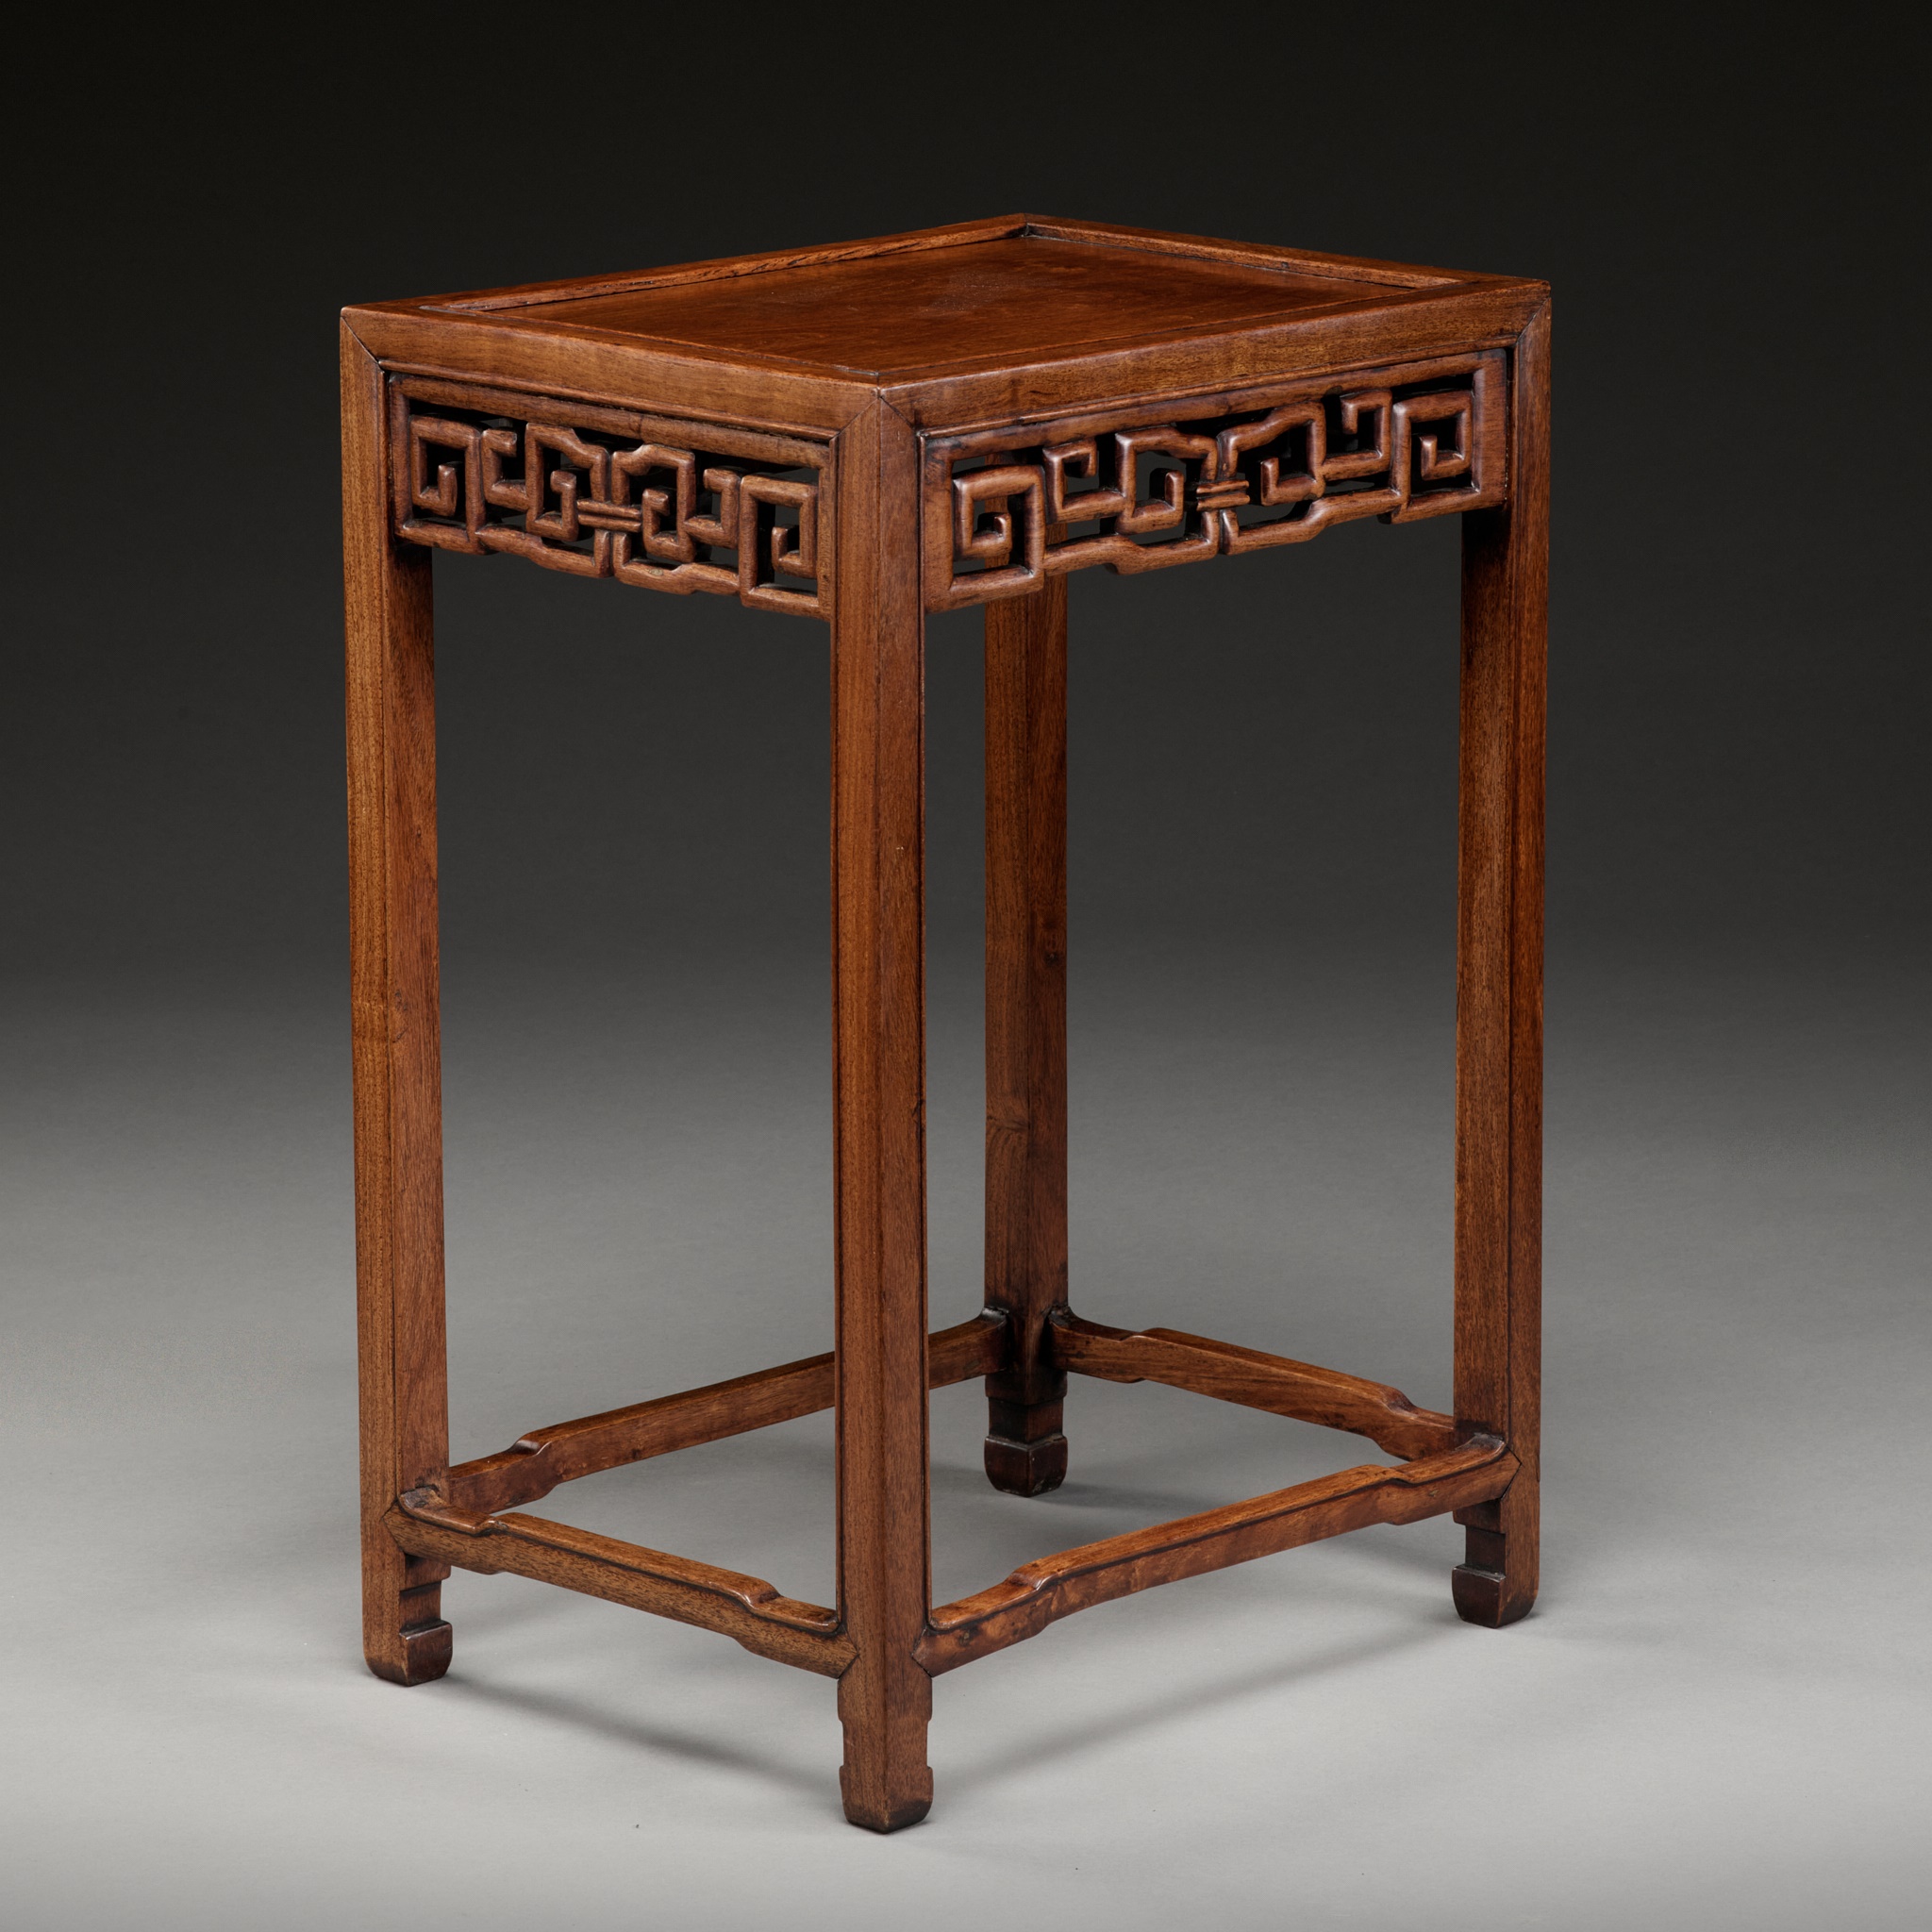 A HONGMU SIDE TABLE, LATE QING DYNASTY TO EARLY REPUBLIC PERIOD